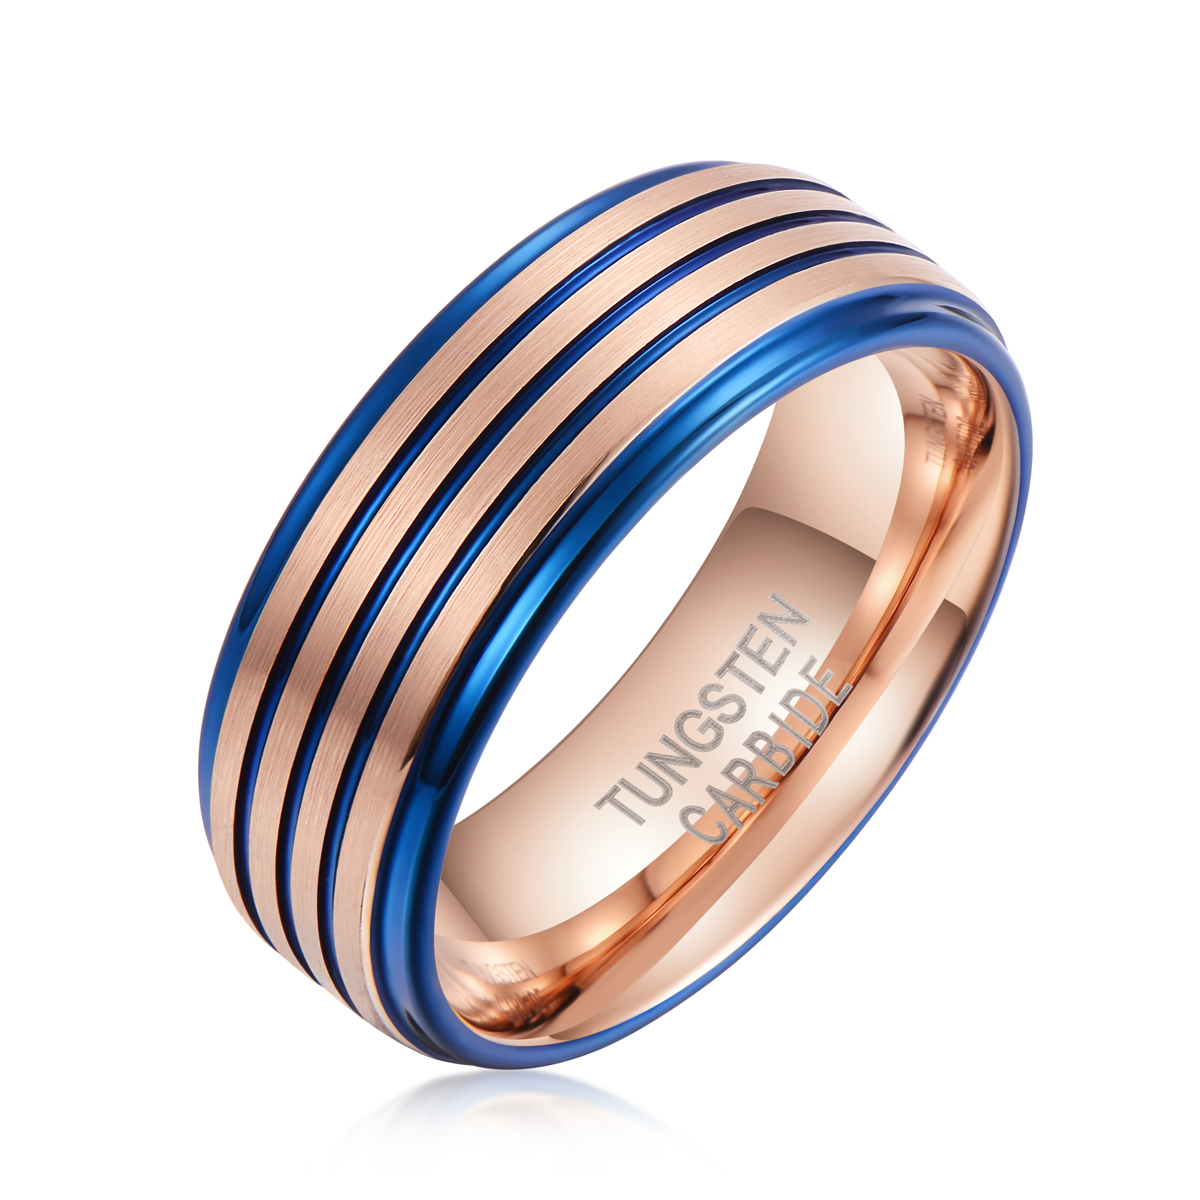 China blue Tungsten Carbide Ring Bevel Blue Rose Gold Groove Wedding Bands Fashion Jewelry Rings For Men Women Featured Image